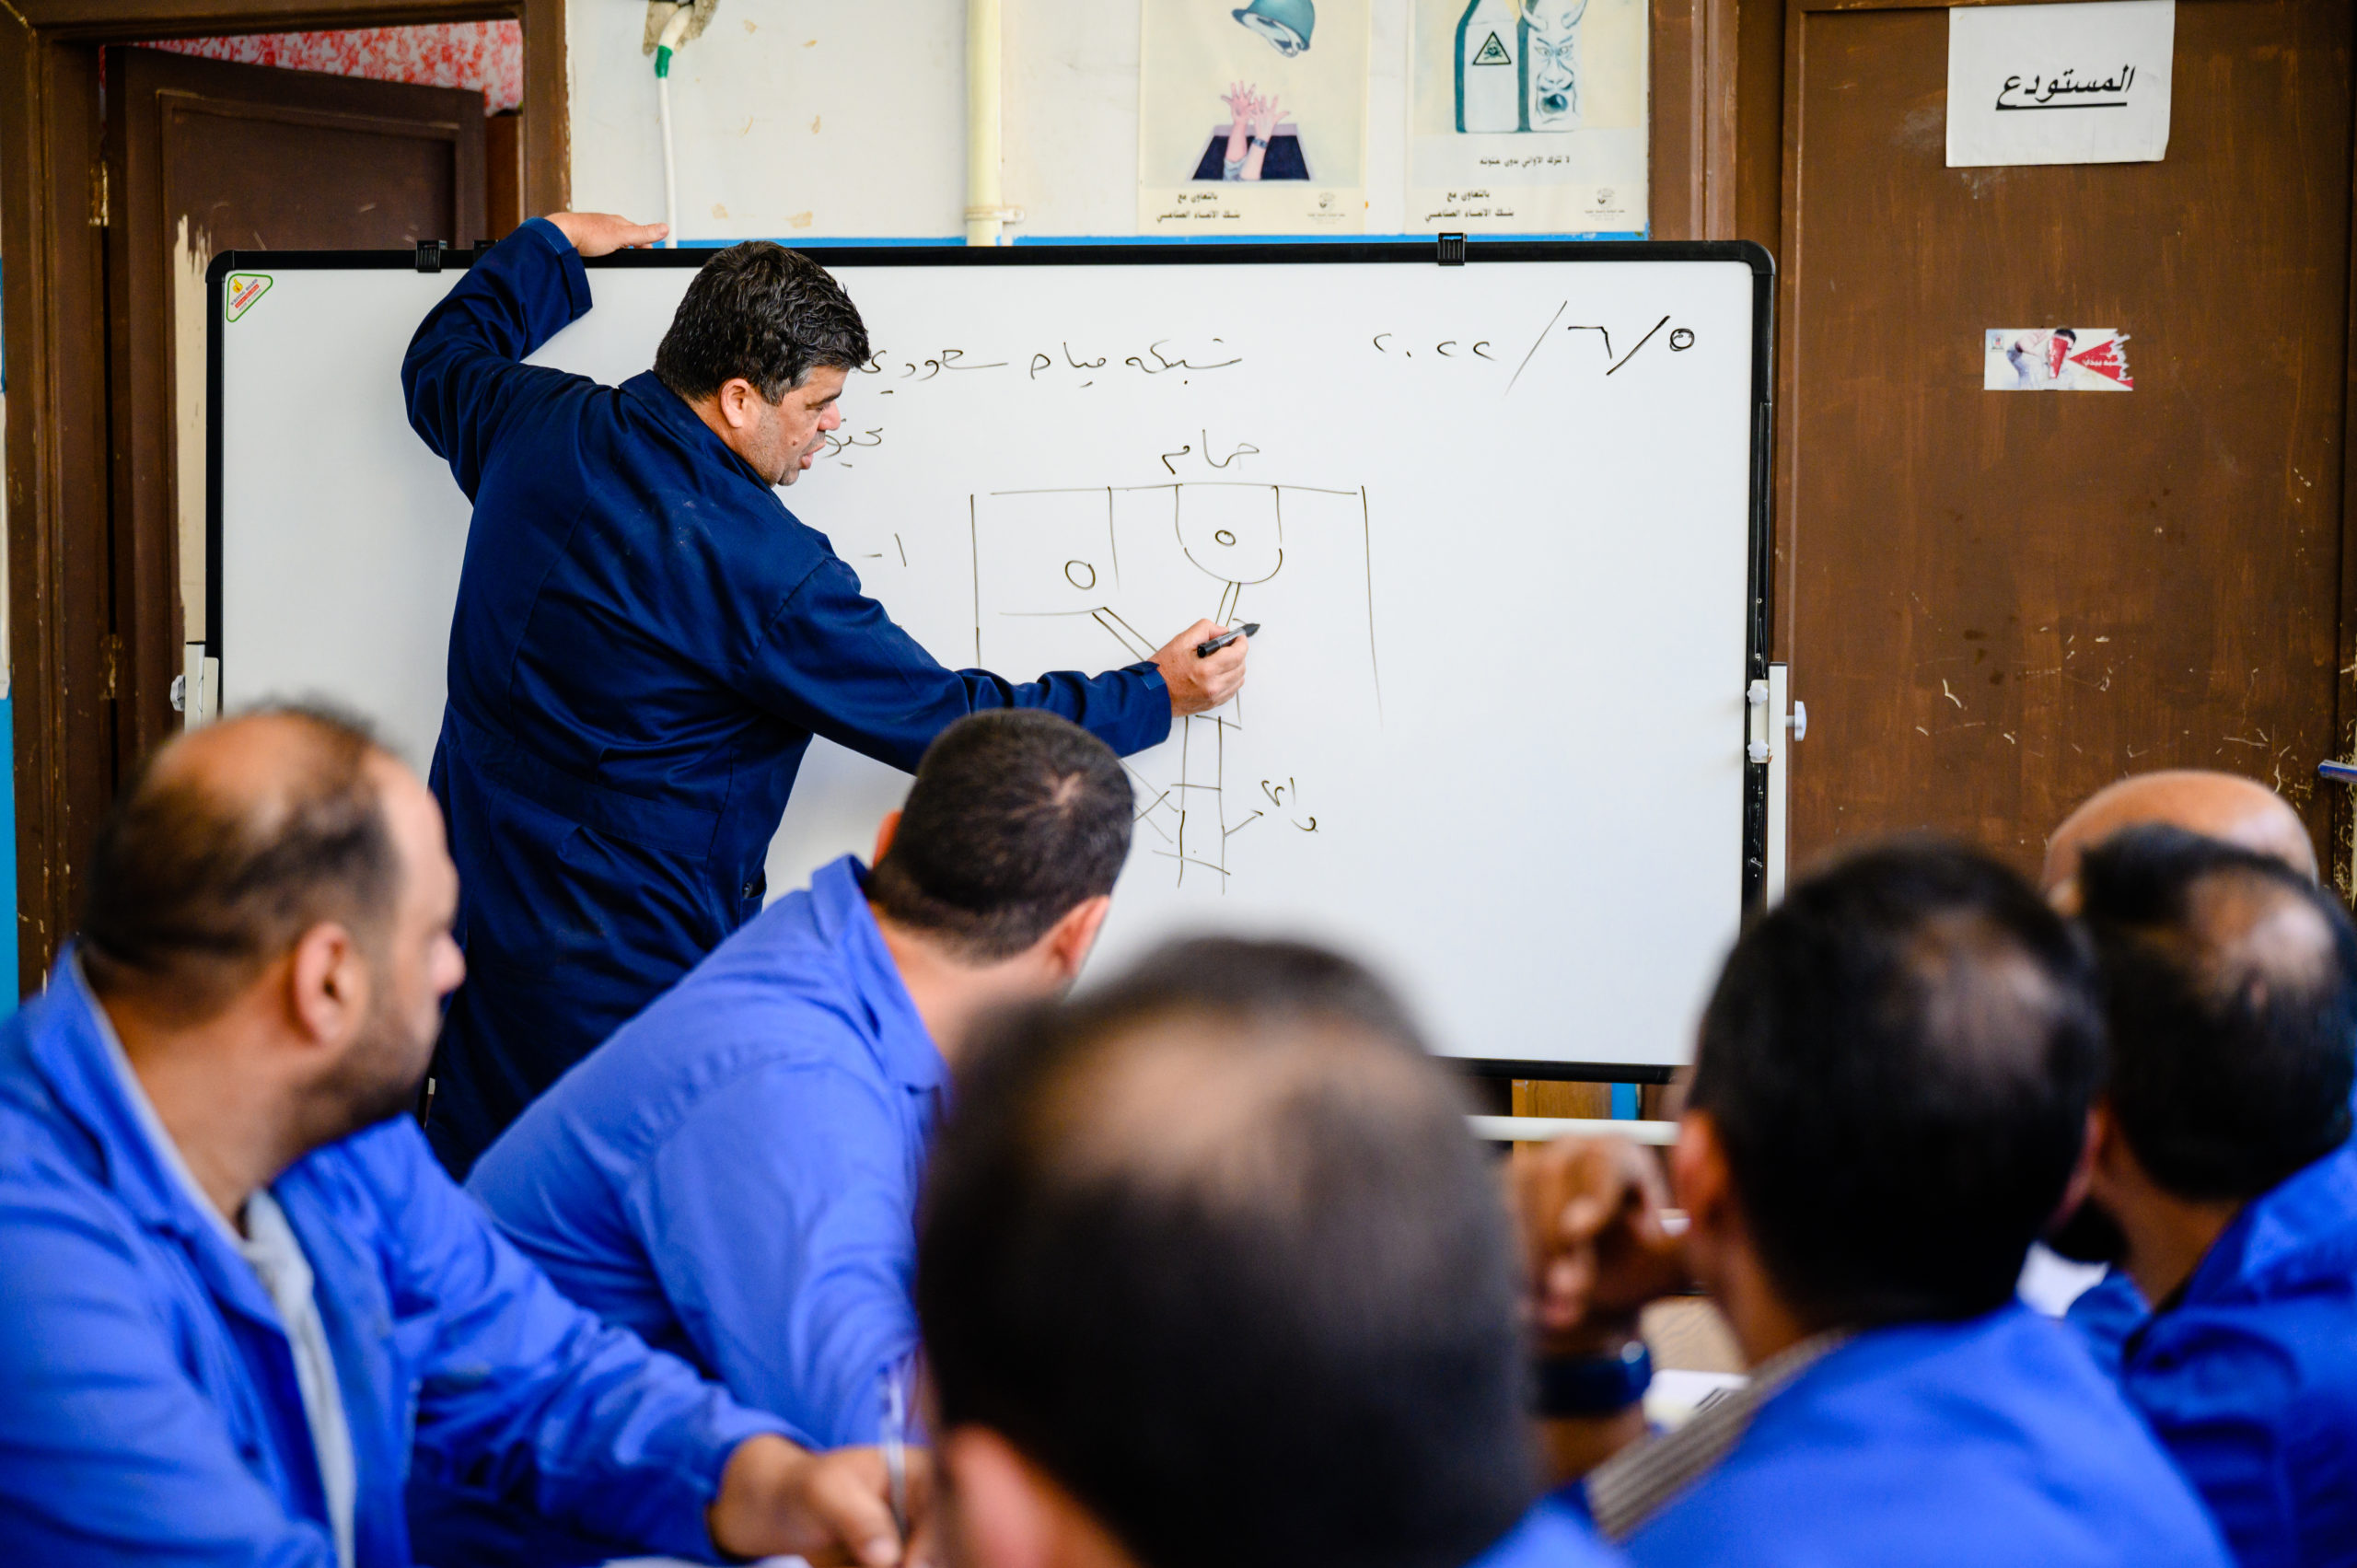 A man wearing a blue overall writes someting on a chalk board. Other men sitting in the classroom.